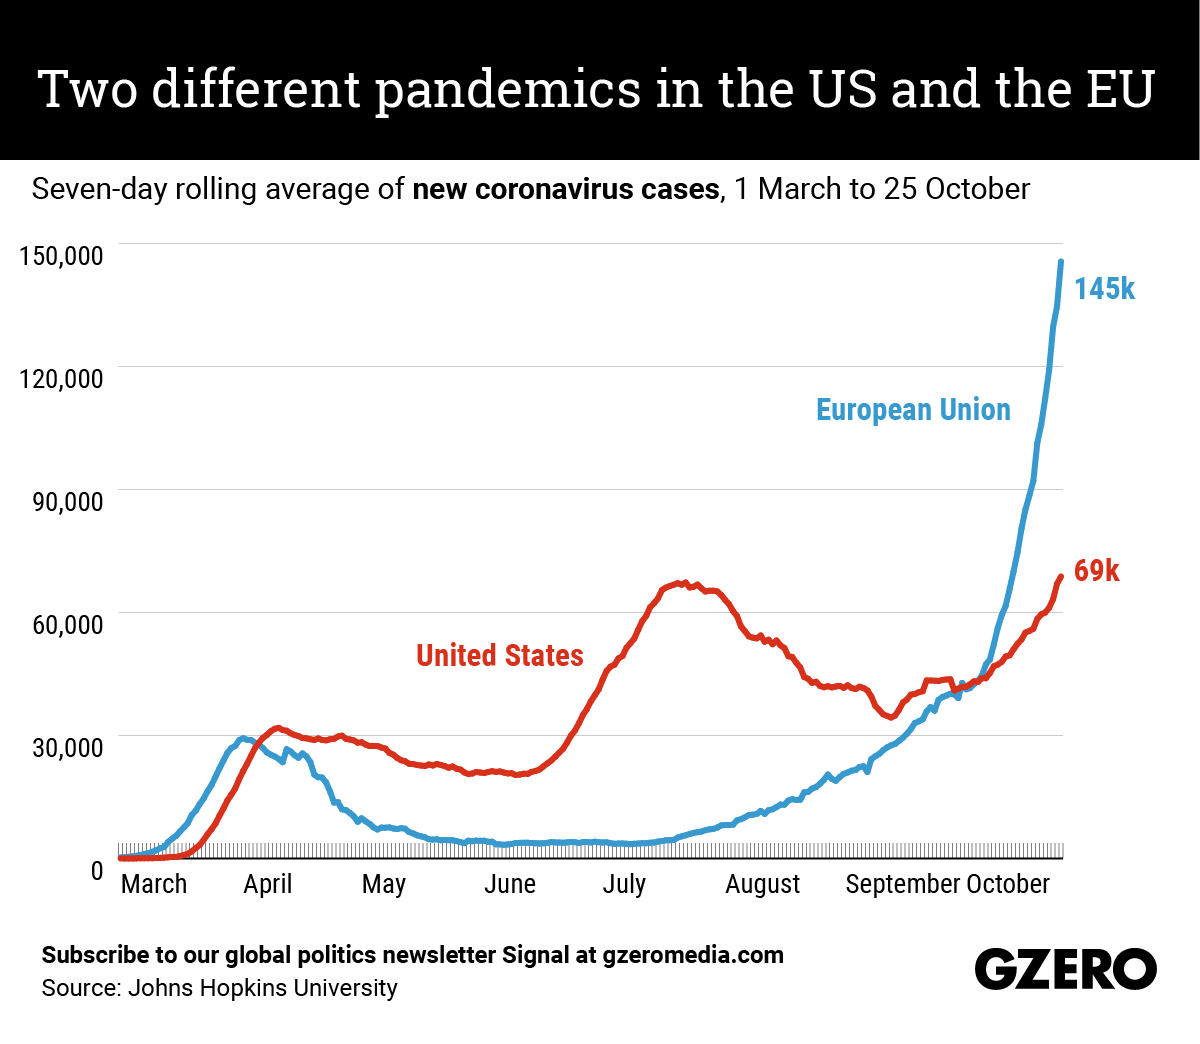 The Graphic Truth: Two different pandemics - EU vs US